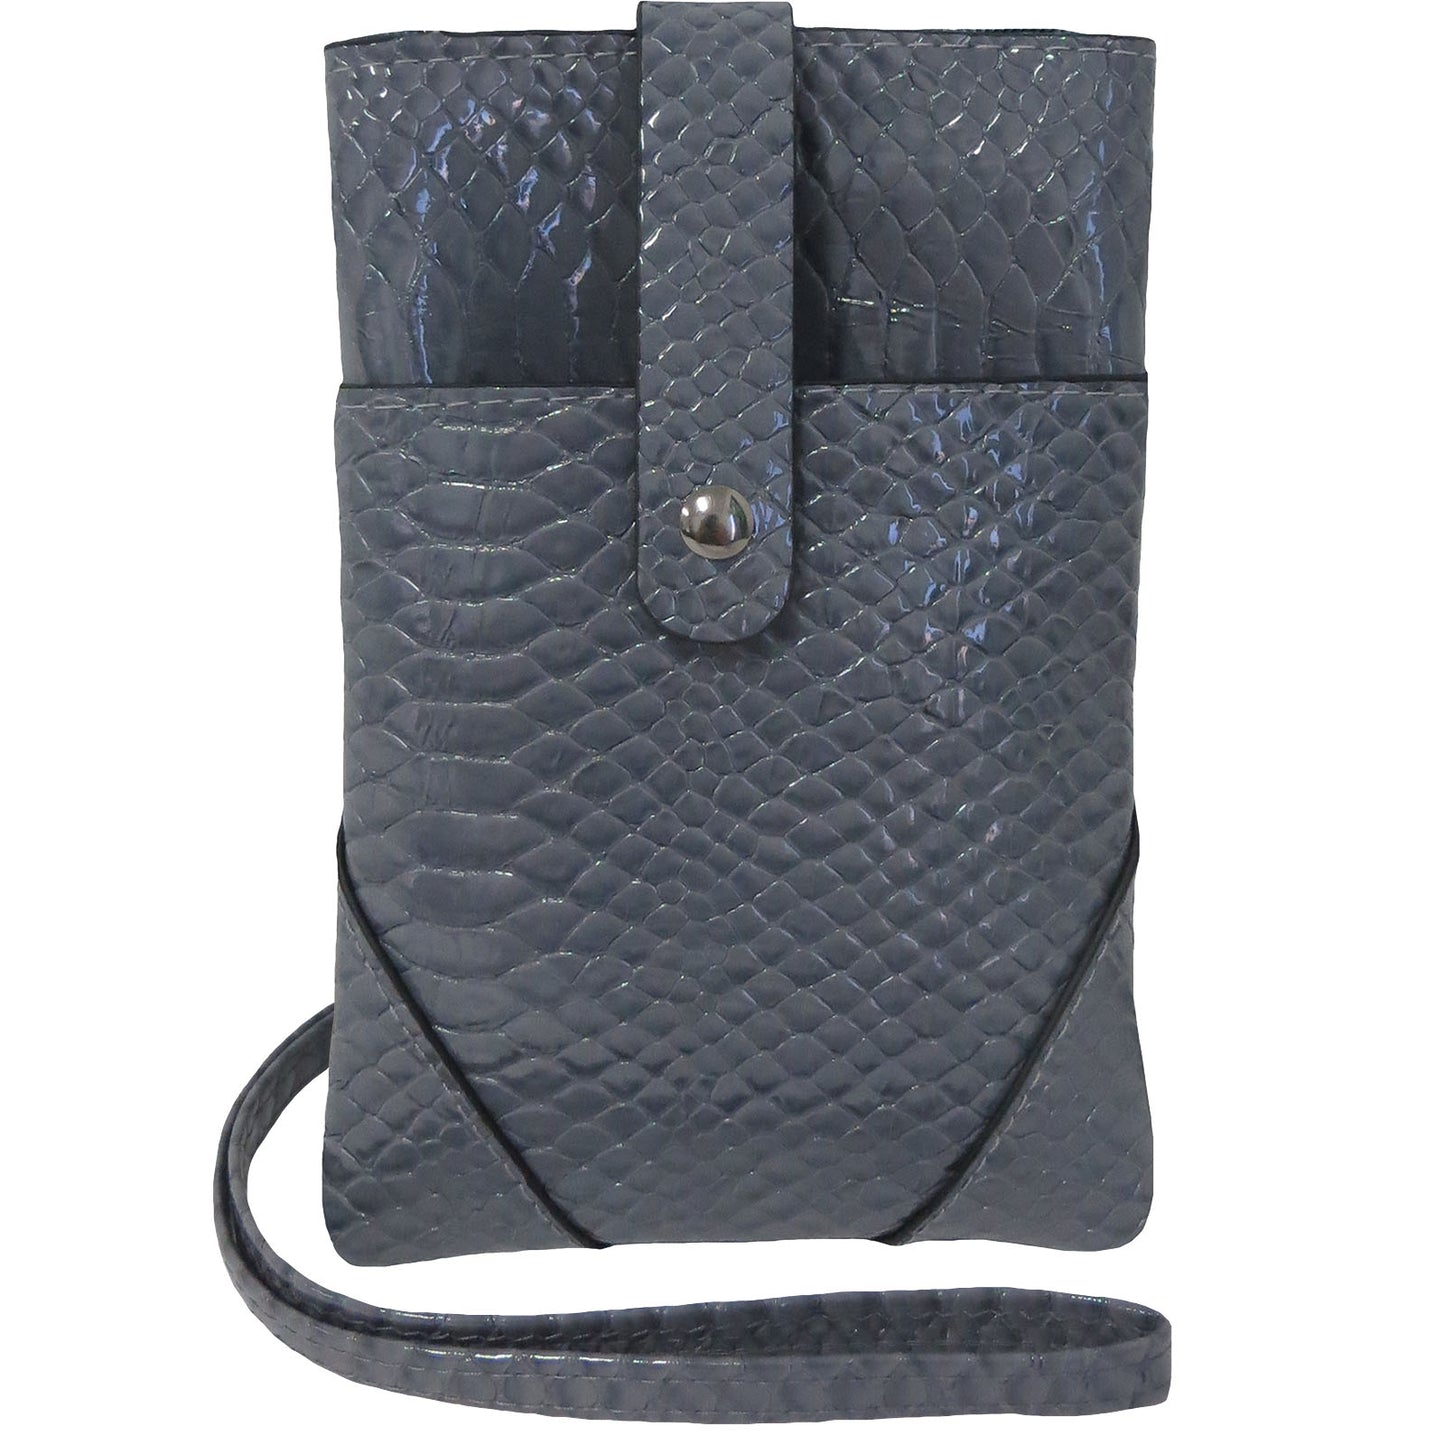 Wholesale Cross Body Bag with Phone Pocket in Gray Snake Print - Alessa Leah